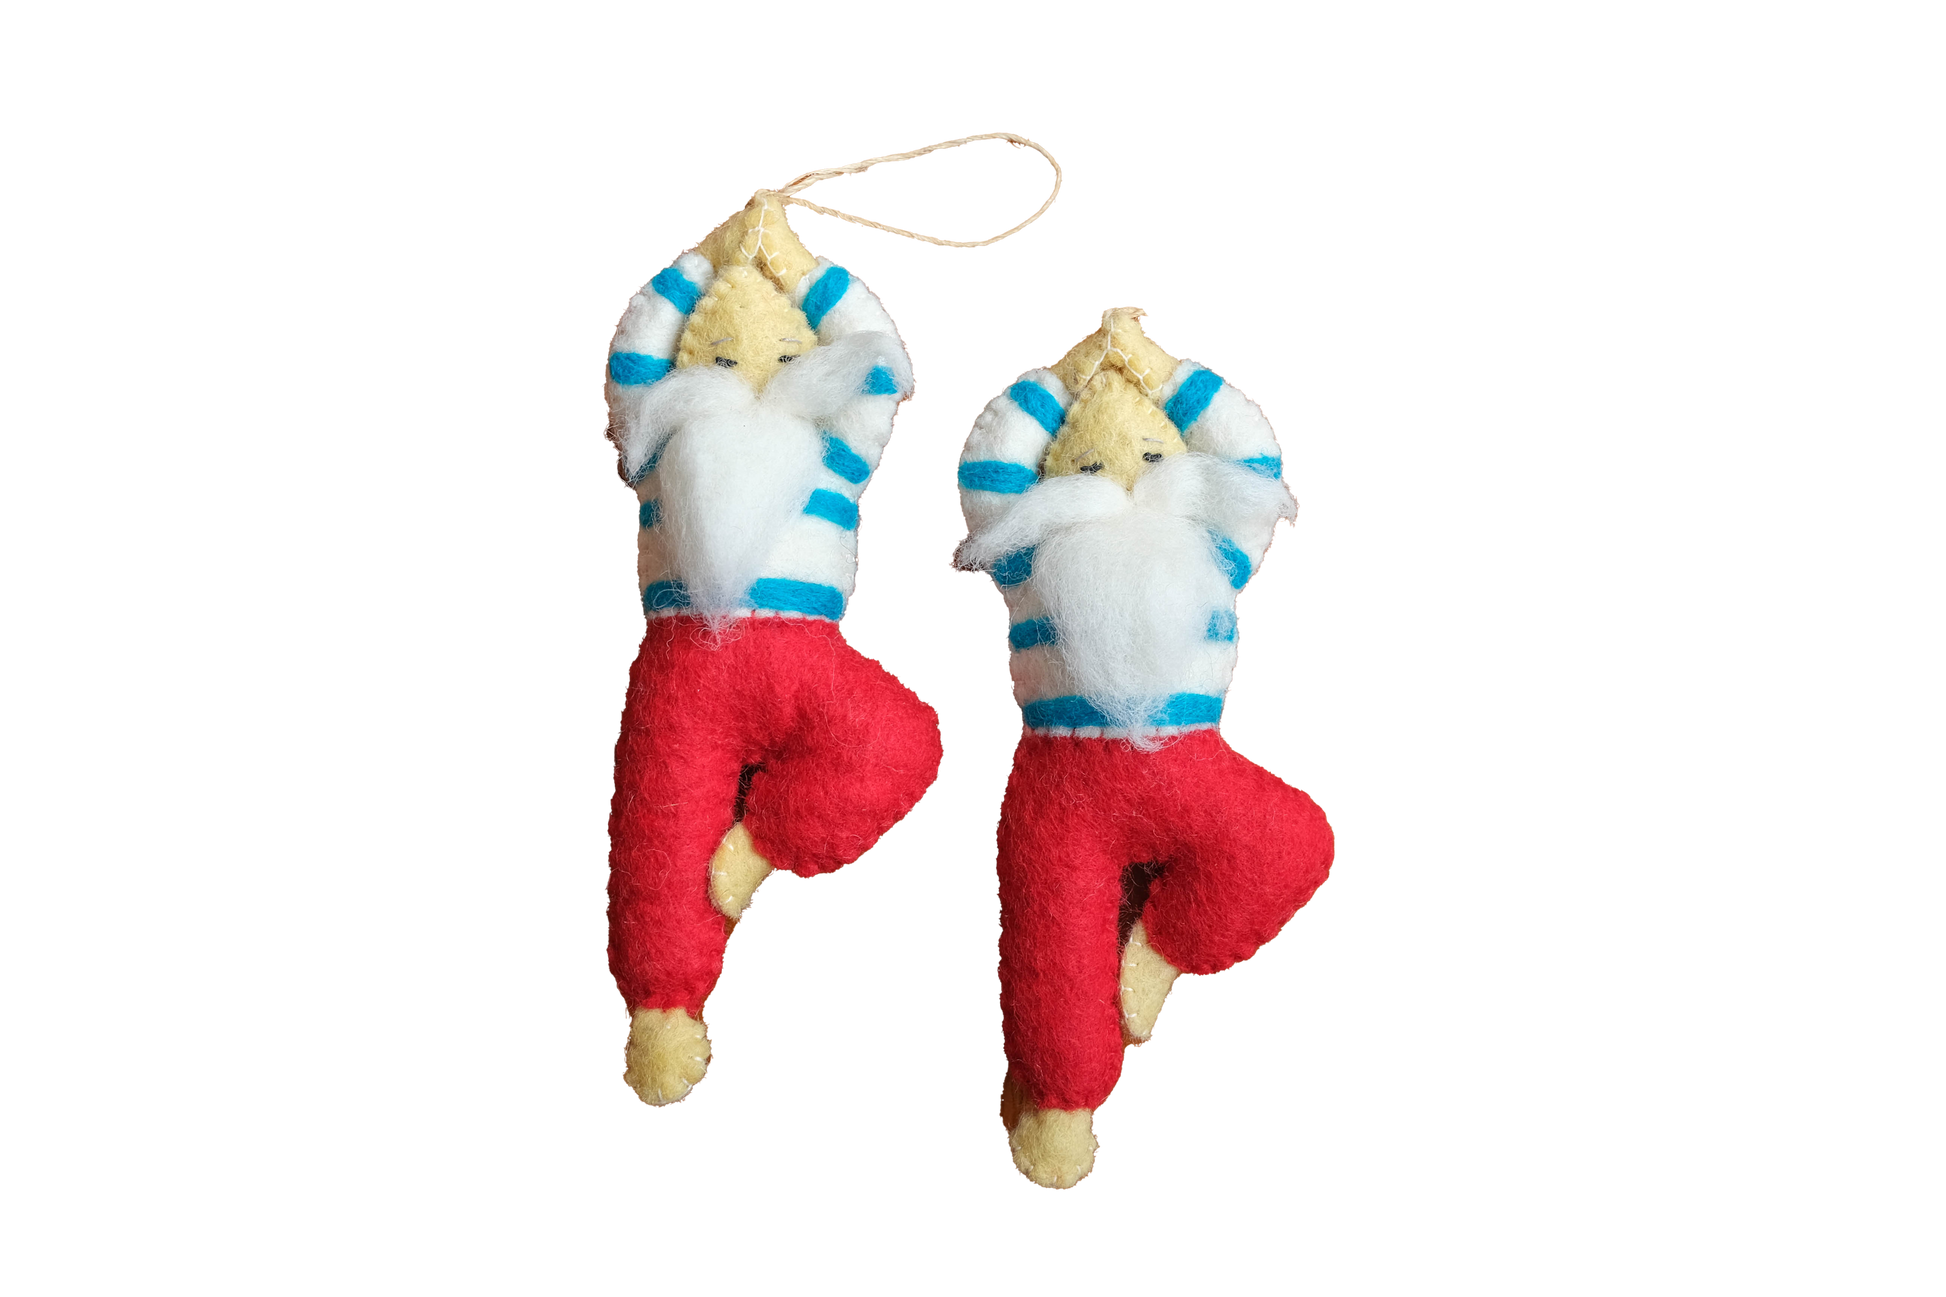 This Global Groove Life, handmade, ethical, fair trade, eco-friendly, sustainable, Felt Yoga Santa ornament set was created by artisans in Kathmandu Nepal and will bring colorful warmth and fun to your Christmas tree this season.